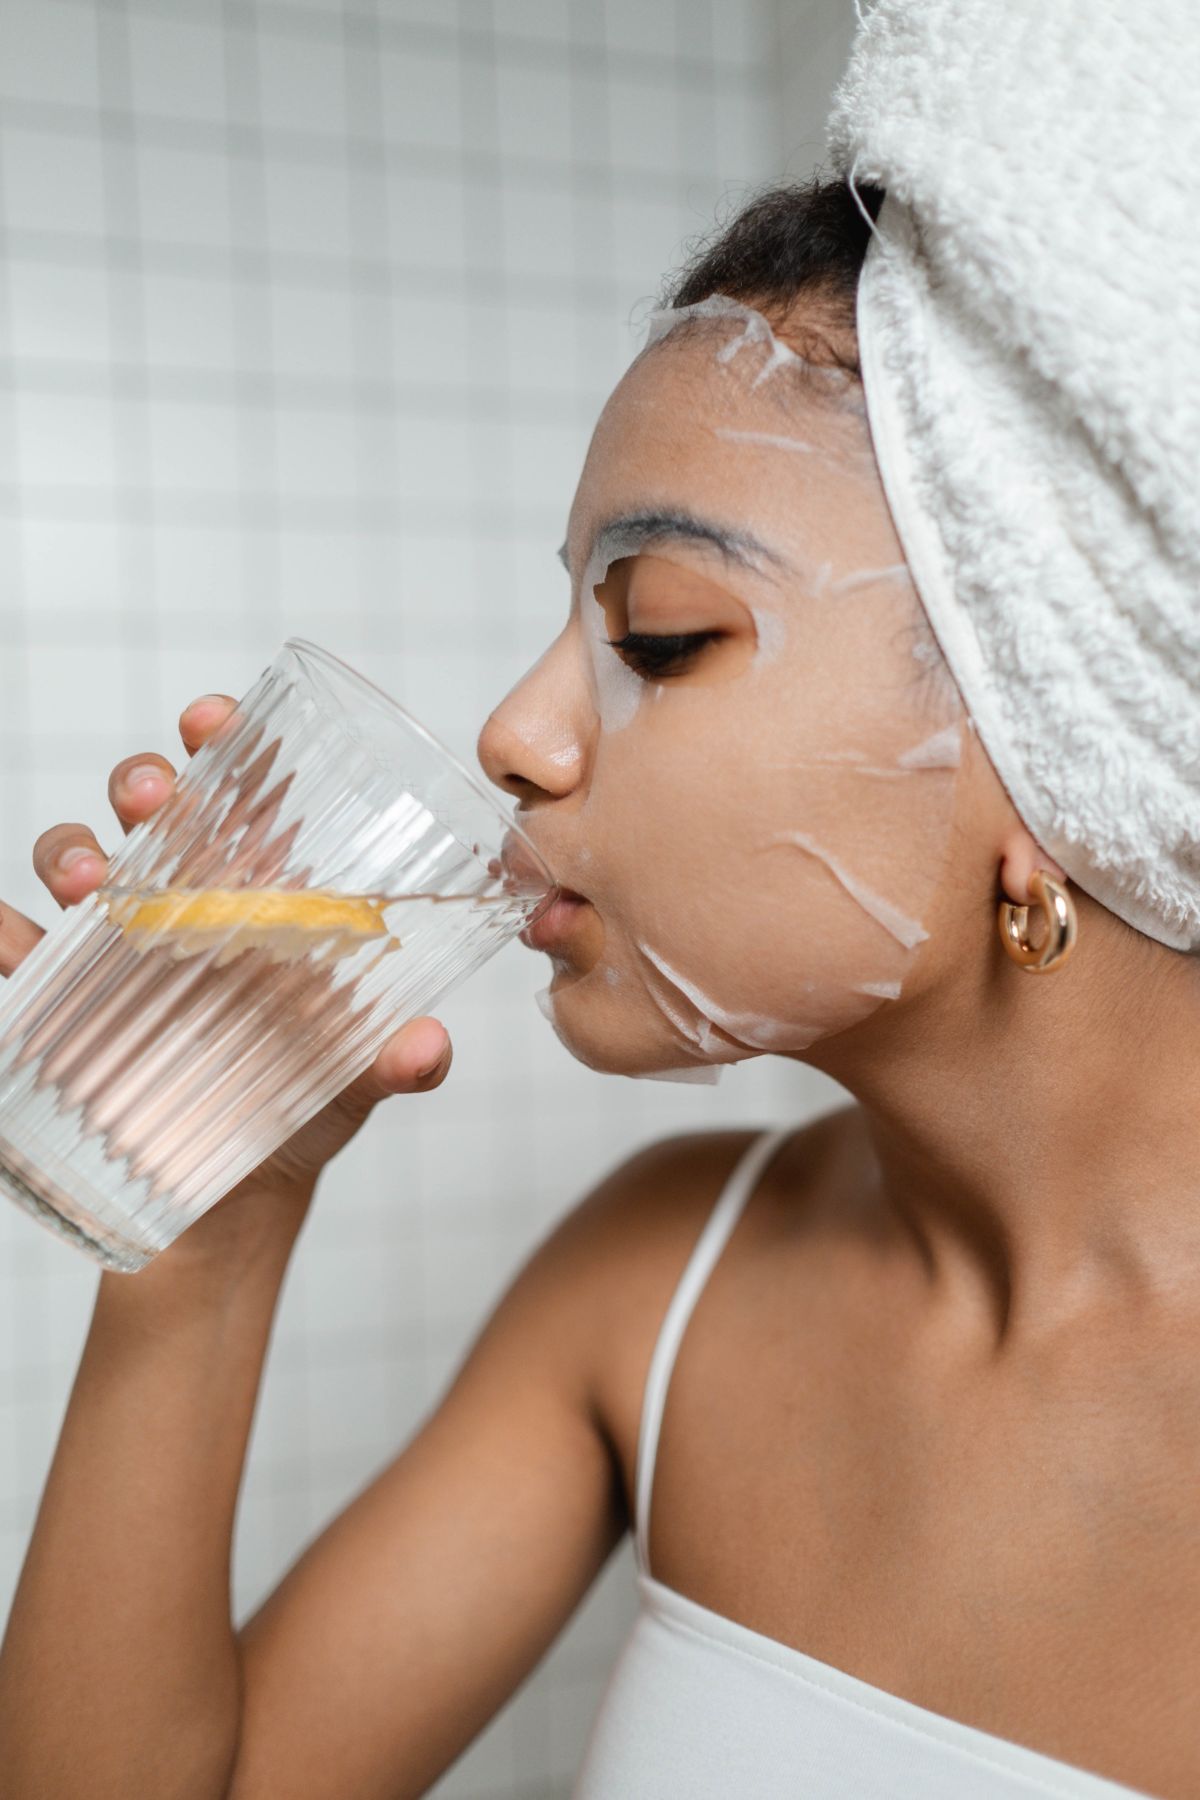 Woman drinking a glass of water with a skin care face mask and hair wrapped in a towel.